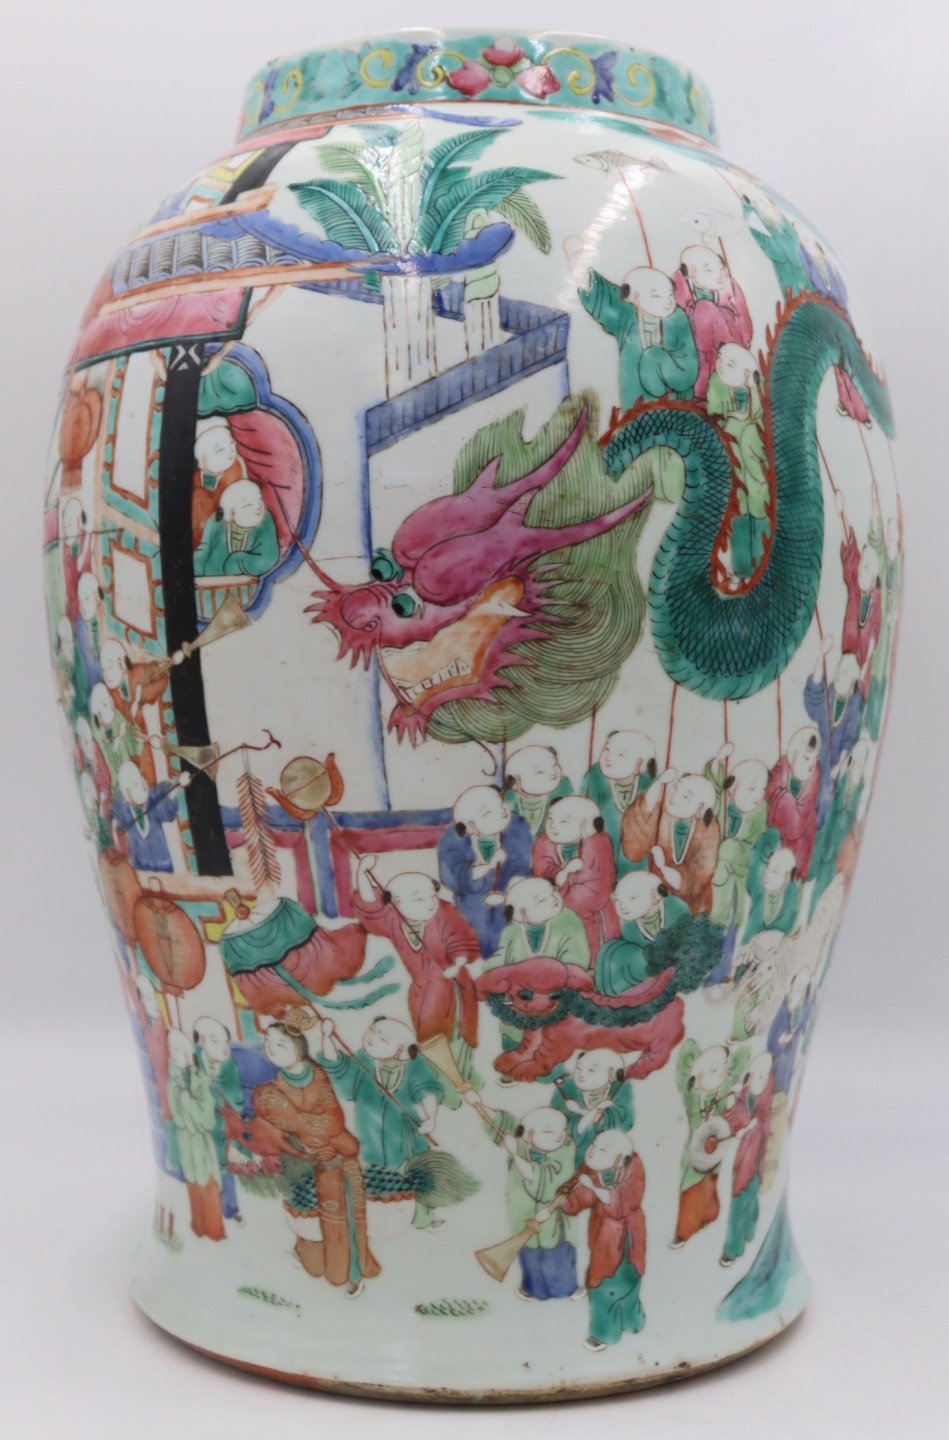 CHINESE FAMILLE ROSE ENAMEL DECORATED